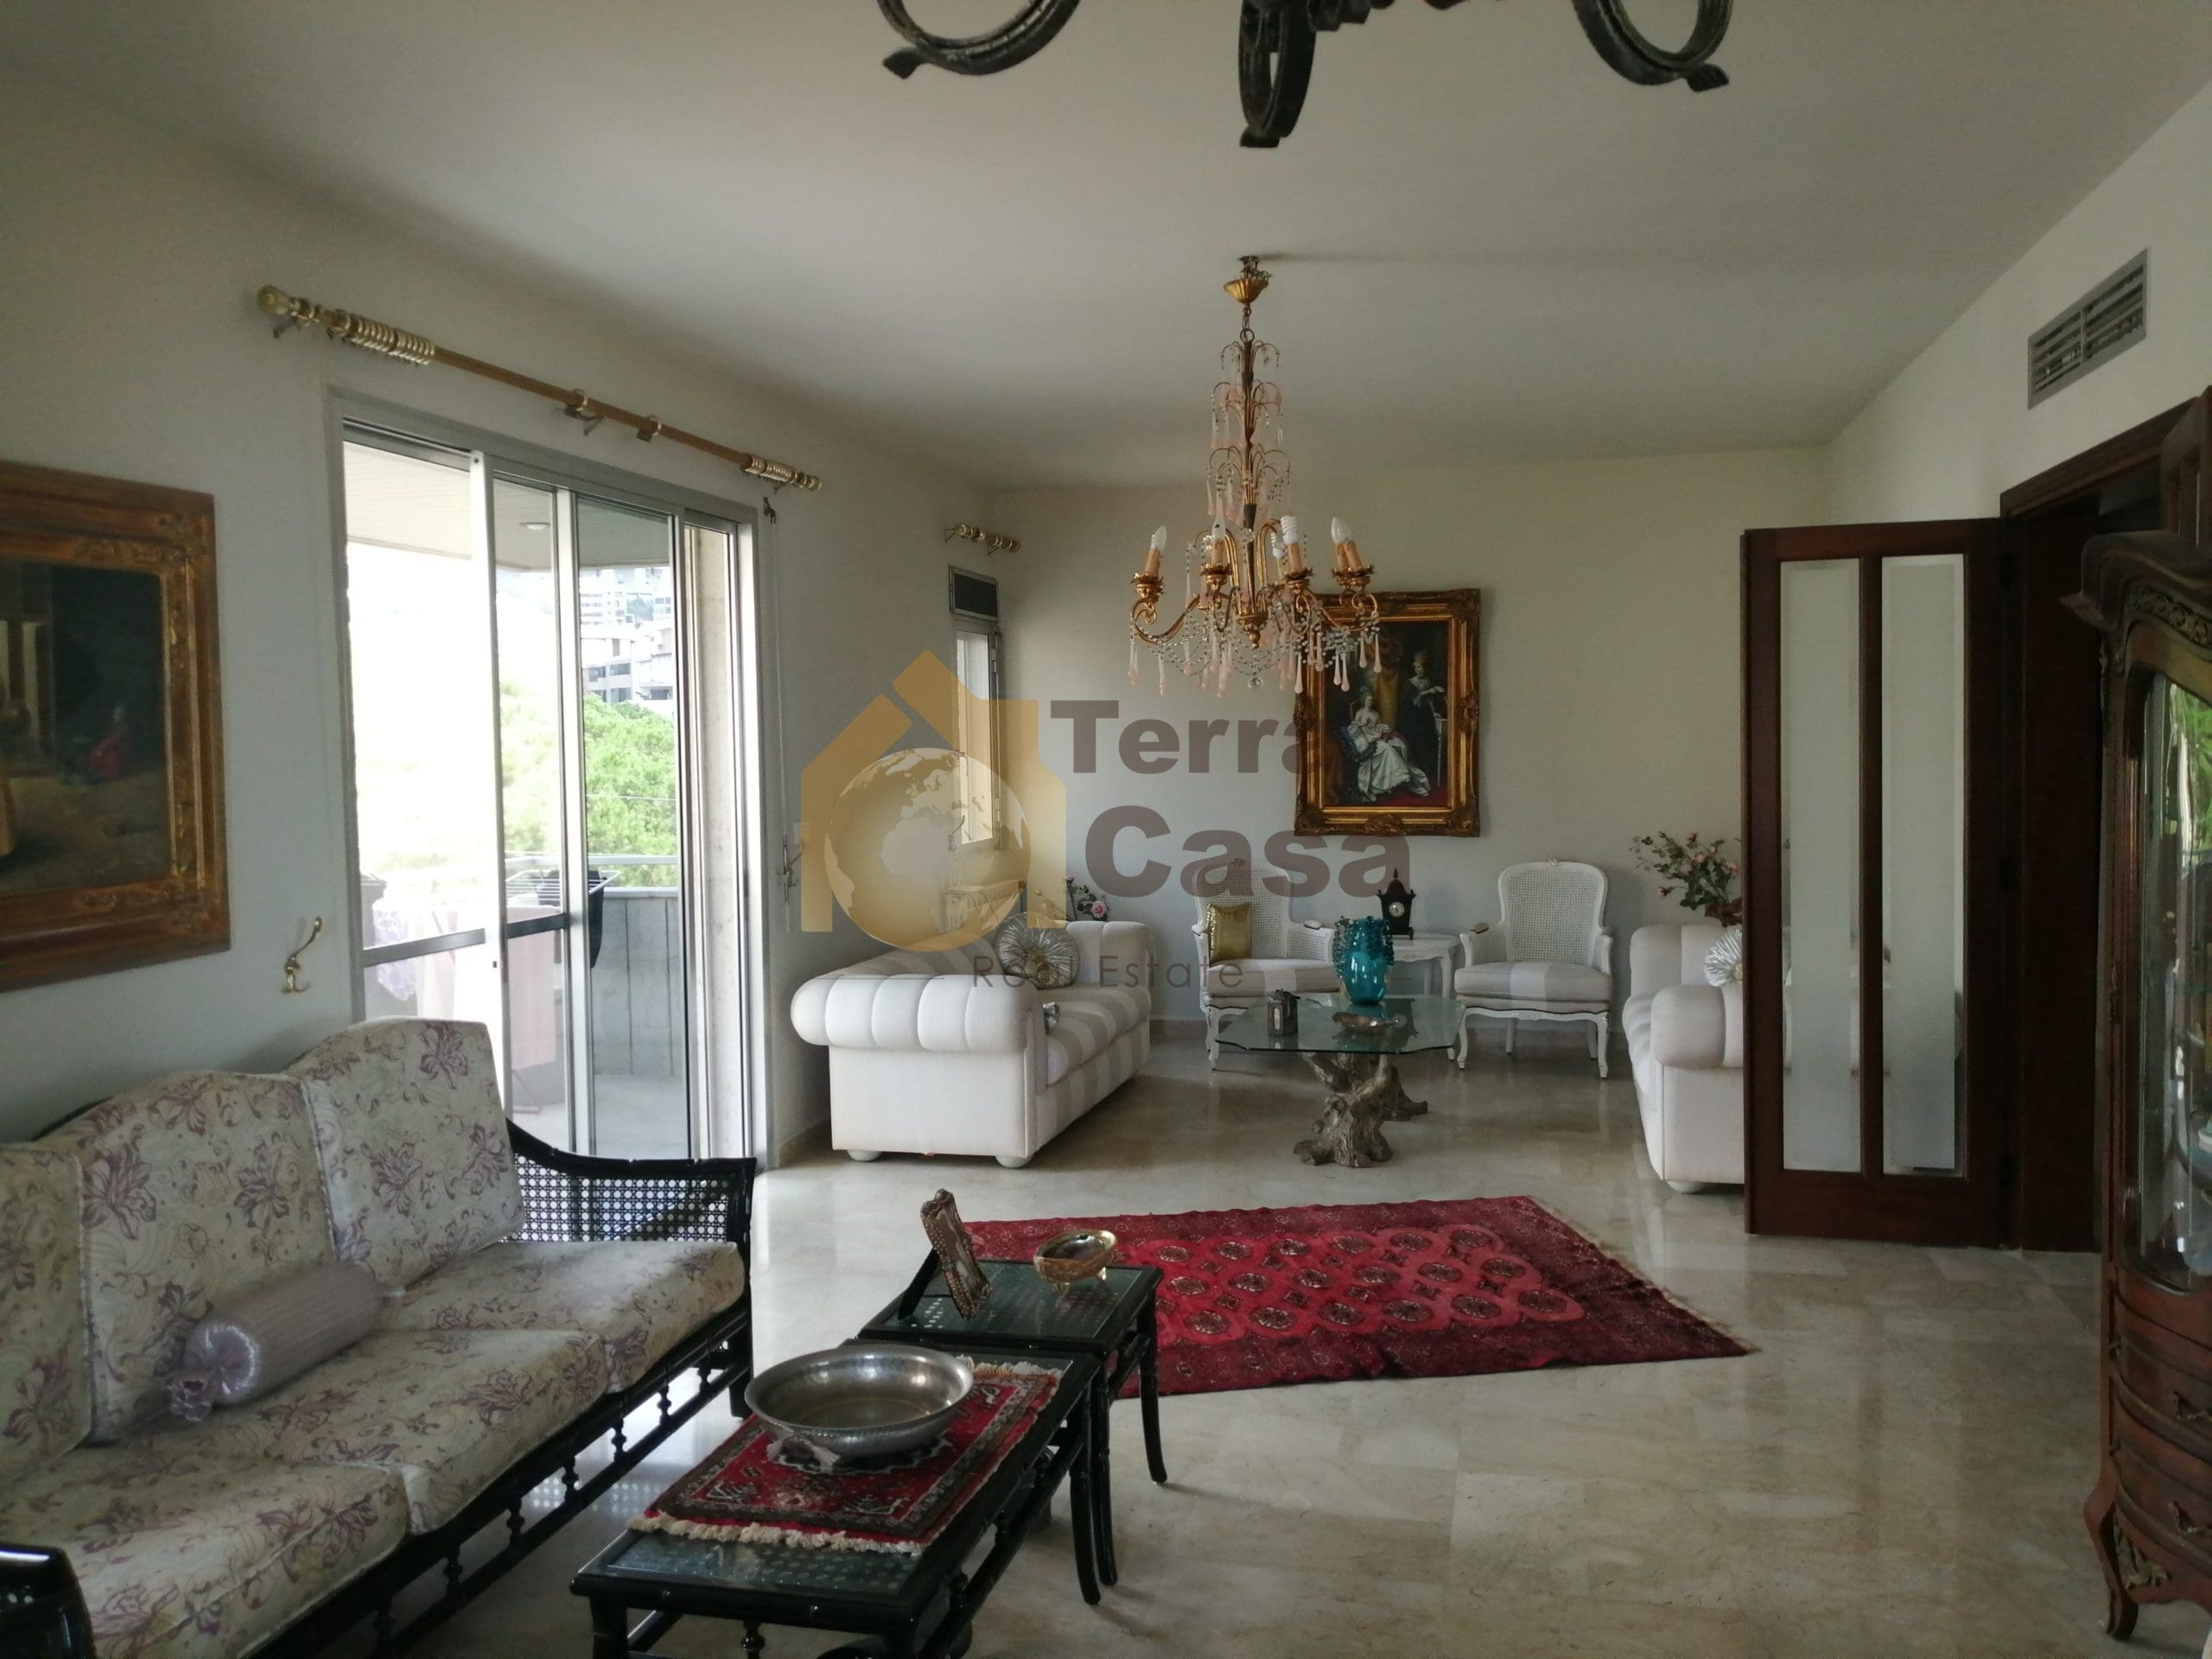 Apartment for rent in Beit el chaar fully furnished open sea view one unit per floor.